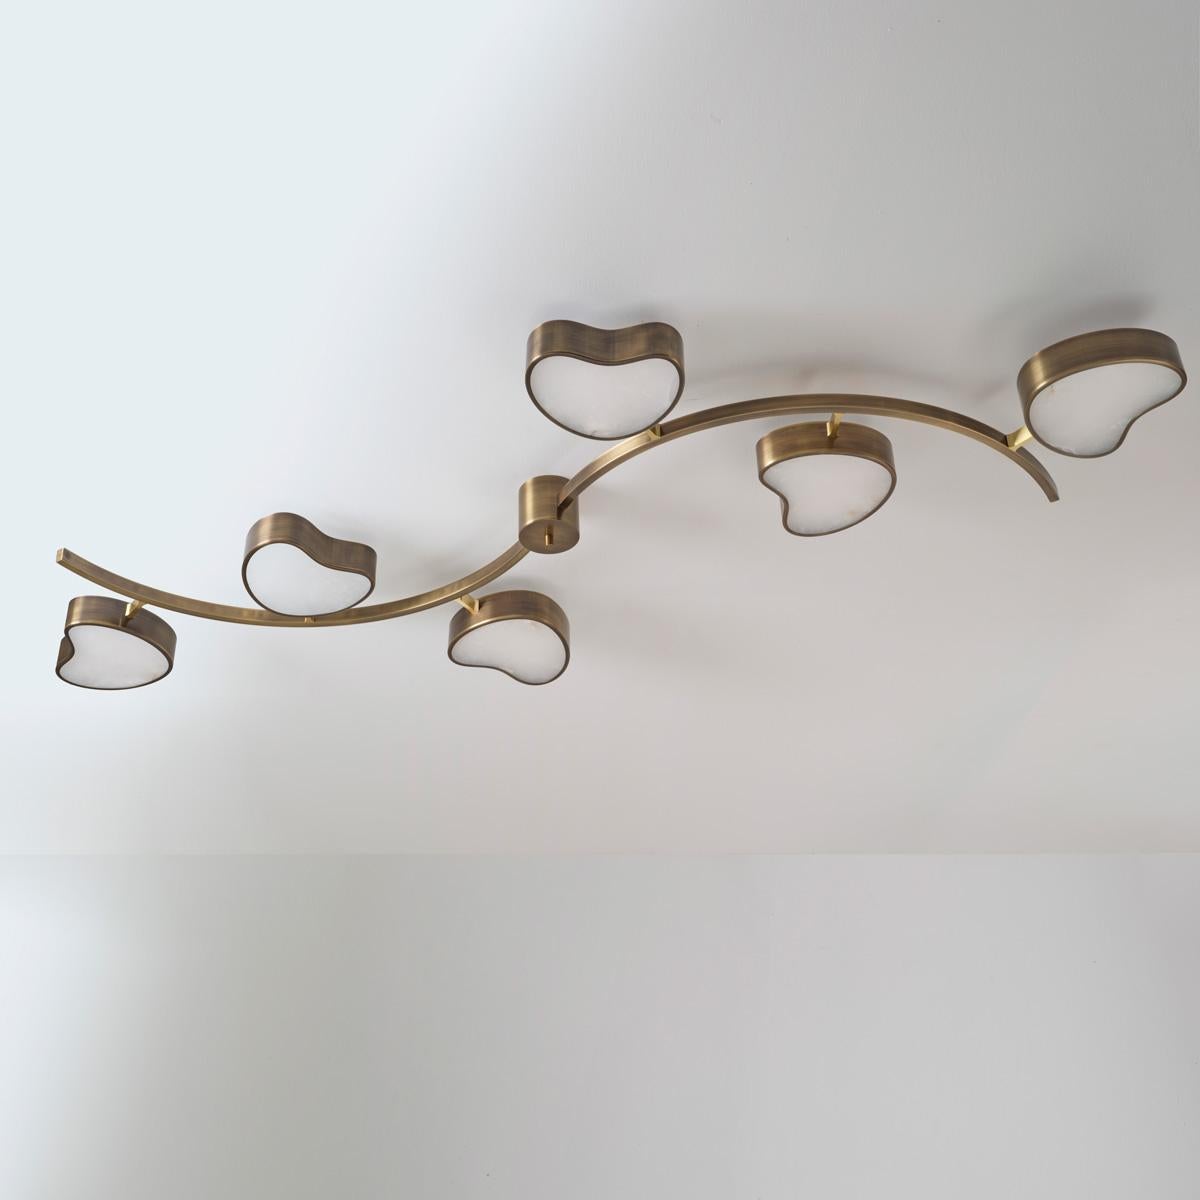 Cuore N.6 Ceiling Light by Gaspare Asaro. Bronze and Satin Brass Finish In New Condition For Sale In New York, NY